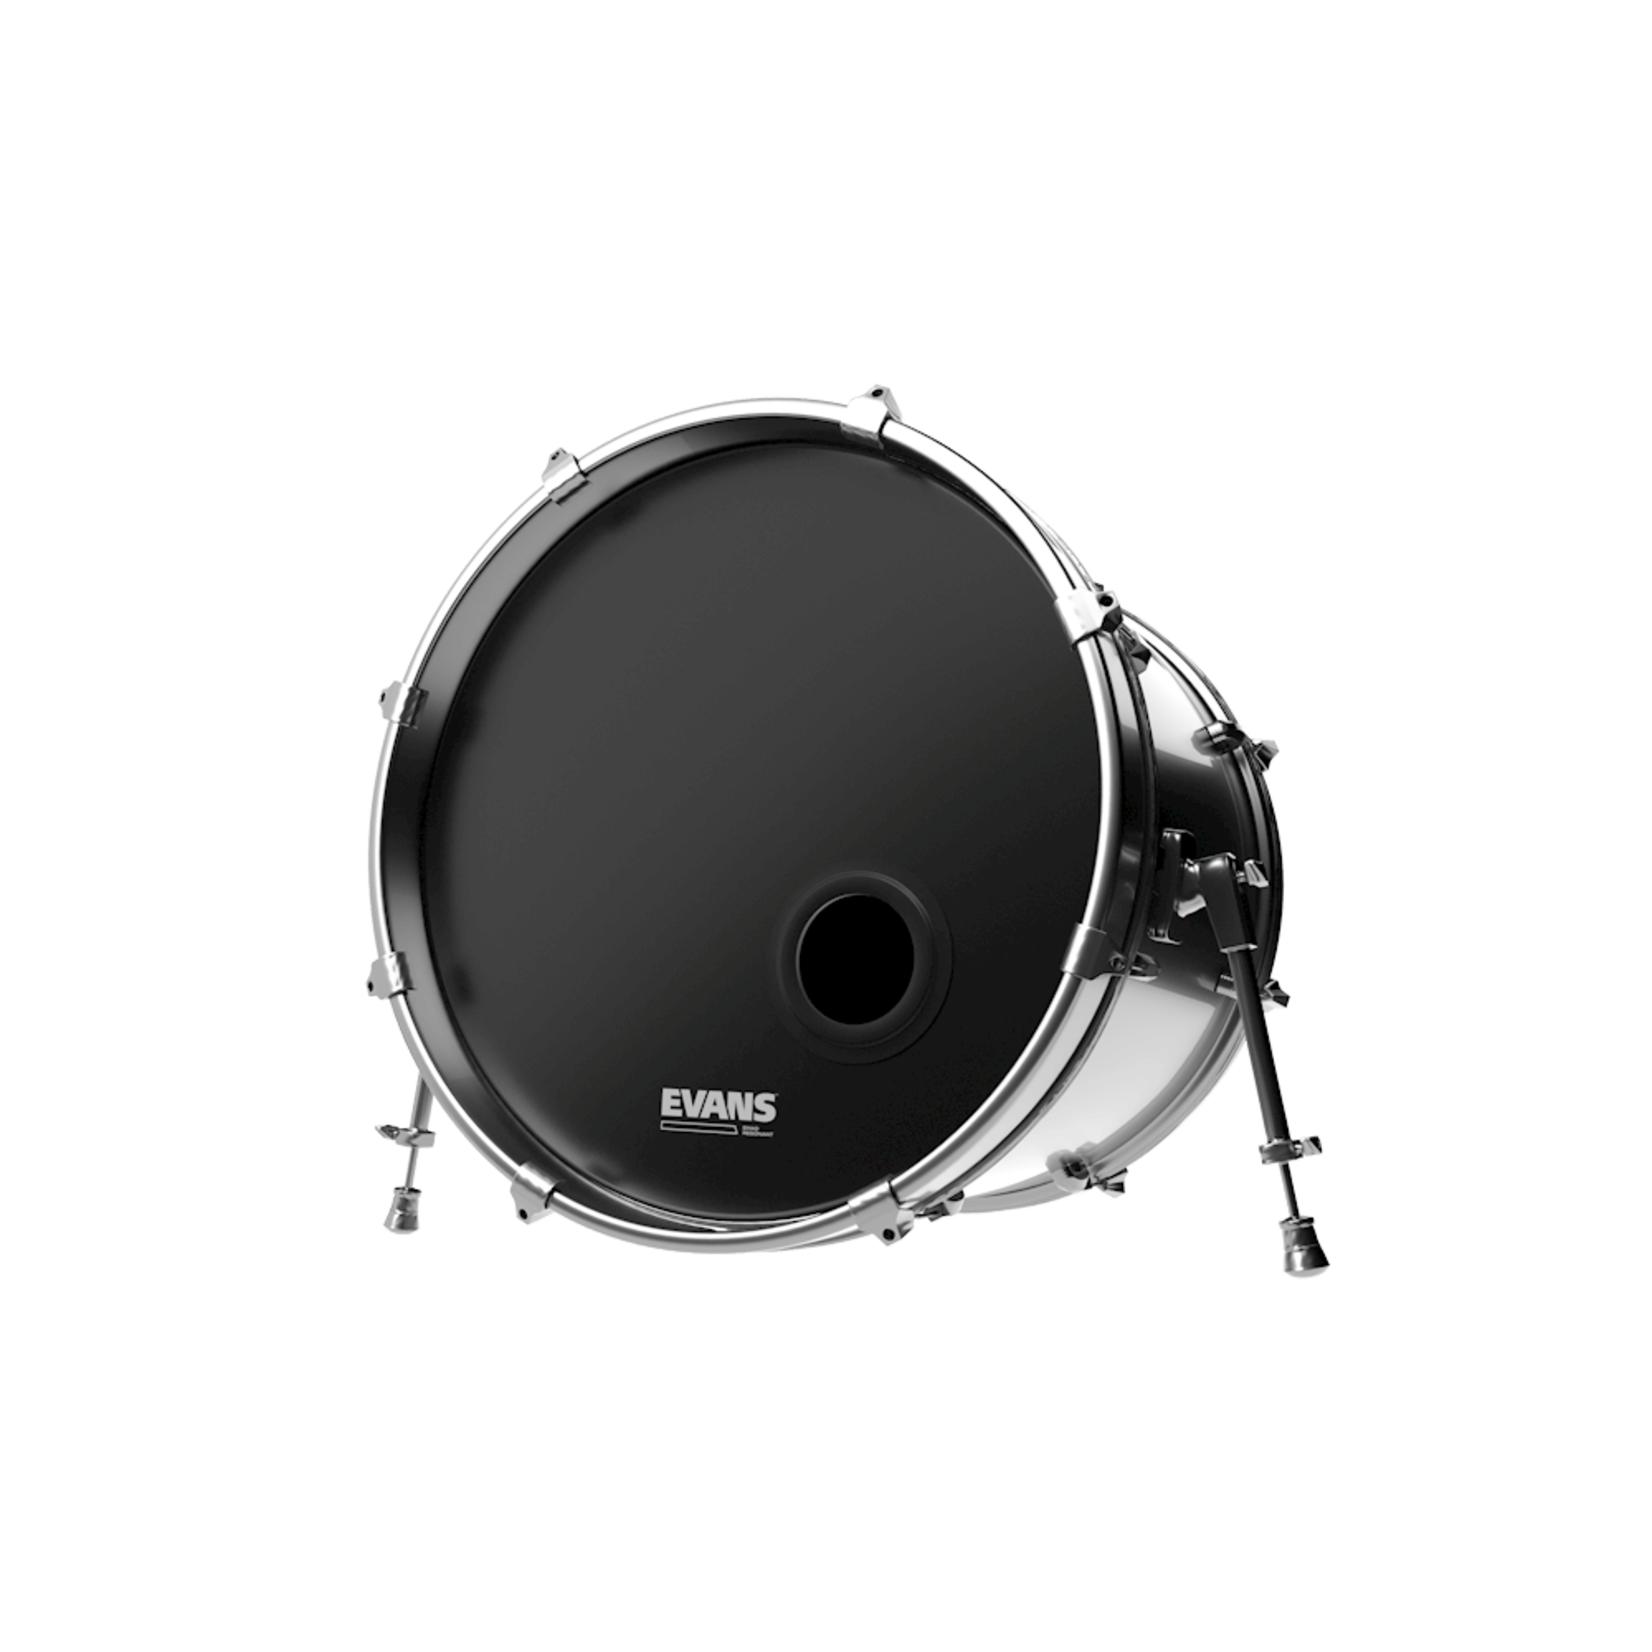 Evans Evans 22" EMAD System Bass Drumhead Pack